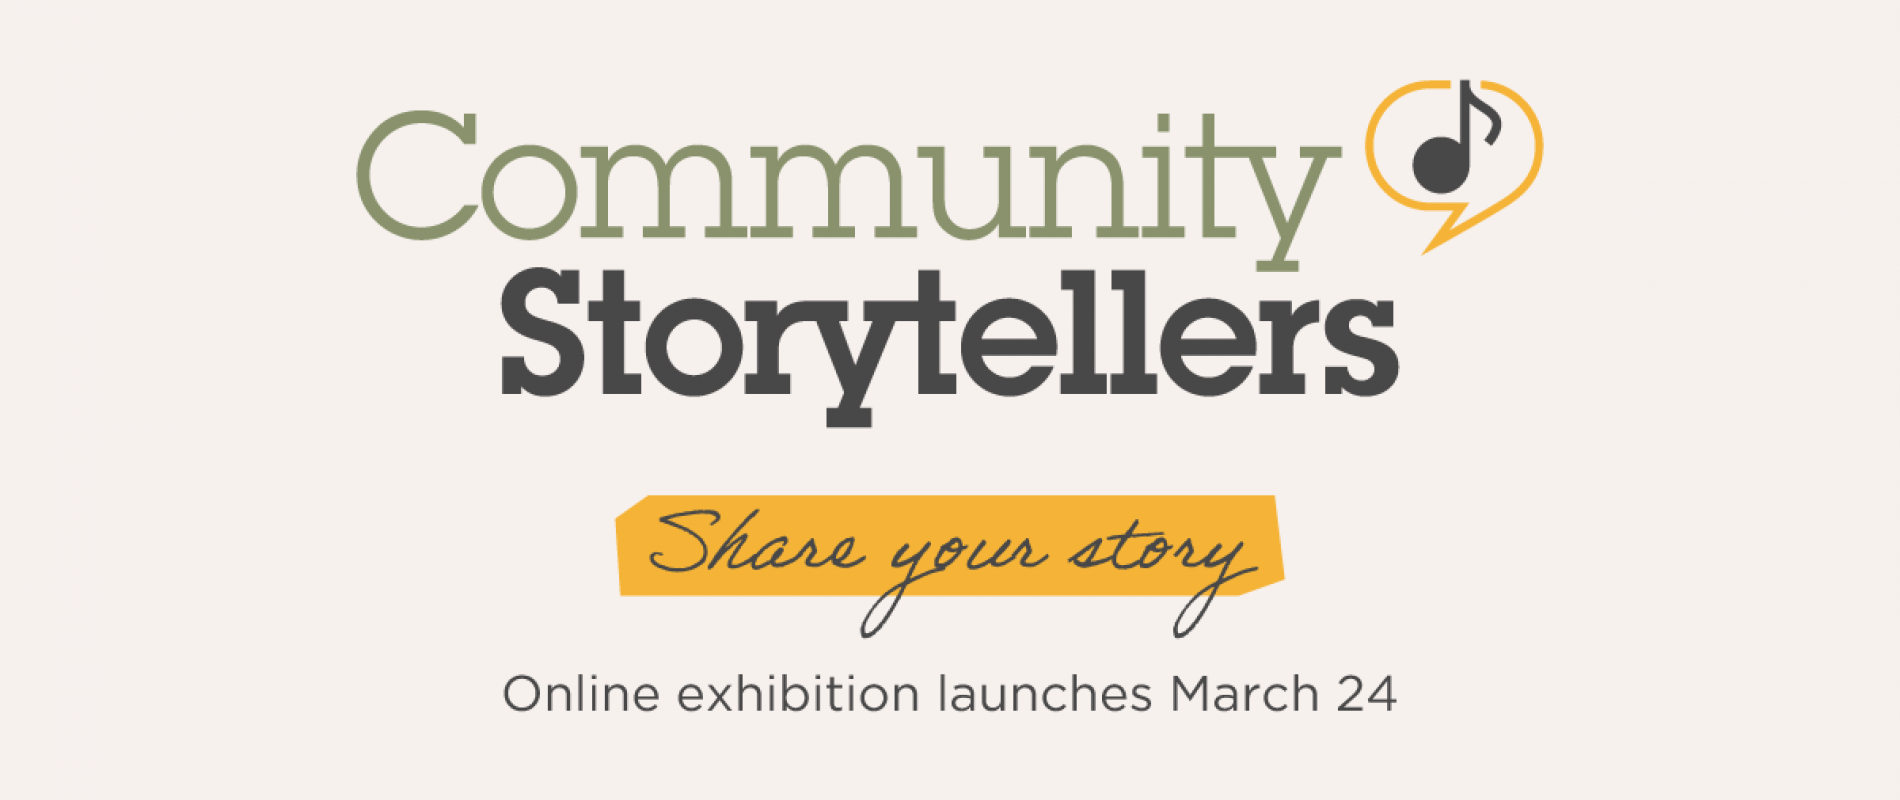 National Music Centre launches online exhibition, Community Storytellers, on March 24